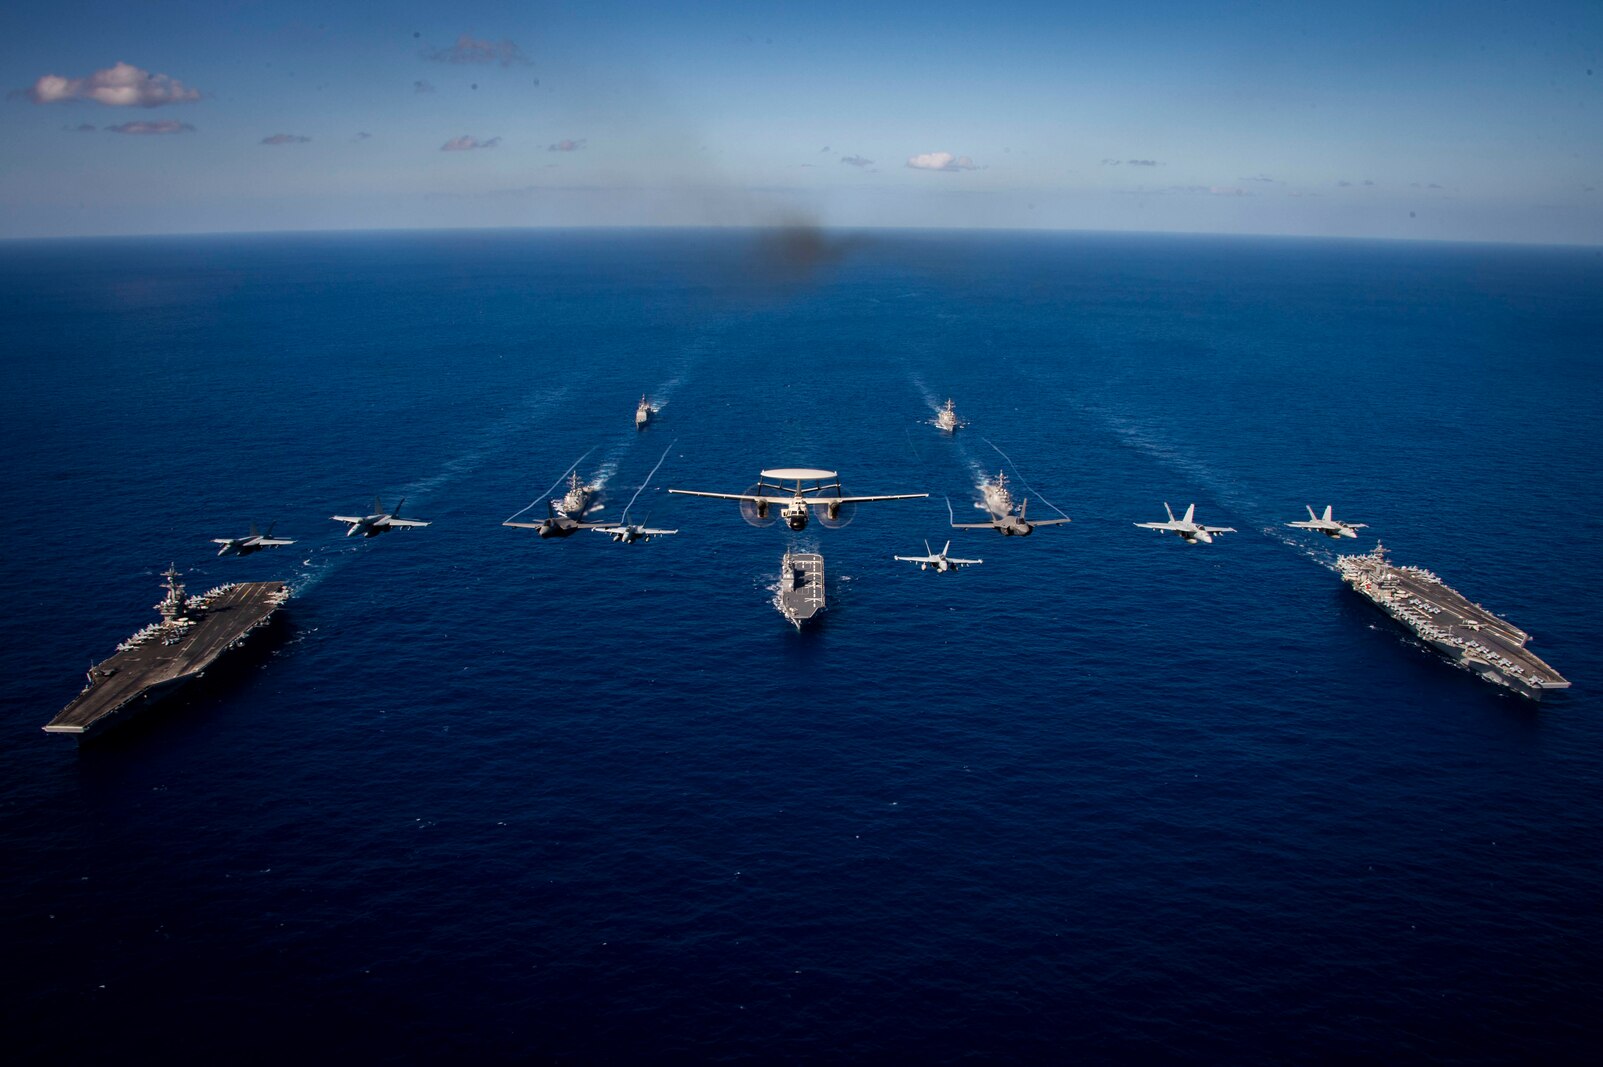 From left to right, Nimitz-class aircraft carrier USS Carl Vinson (CVN 70), Arleigh Burke-class guided-missile destroyer USS Sterett (DDG 104), Ticonderoga-class guided-missile cruiser USS Princeton (CG 59), Hyuga-class helicopter destroyer JS Ise (DDH 182), Arleigh Burke-class guided-missile destroyer USS Rafael Peralta (DDG 115), Arleigh Burke-class guided-missile destroyer USS Daniel K. Inouye (DDG 118), Nimitz-class aircraft carrier USS Theodore Roosevelt (CVN 71) along with aircraft assigned to Carrier Air Wing Two sail and fly in formation during Multi-Large Deck Event (MLDE)